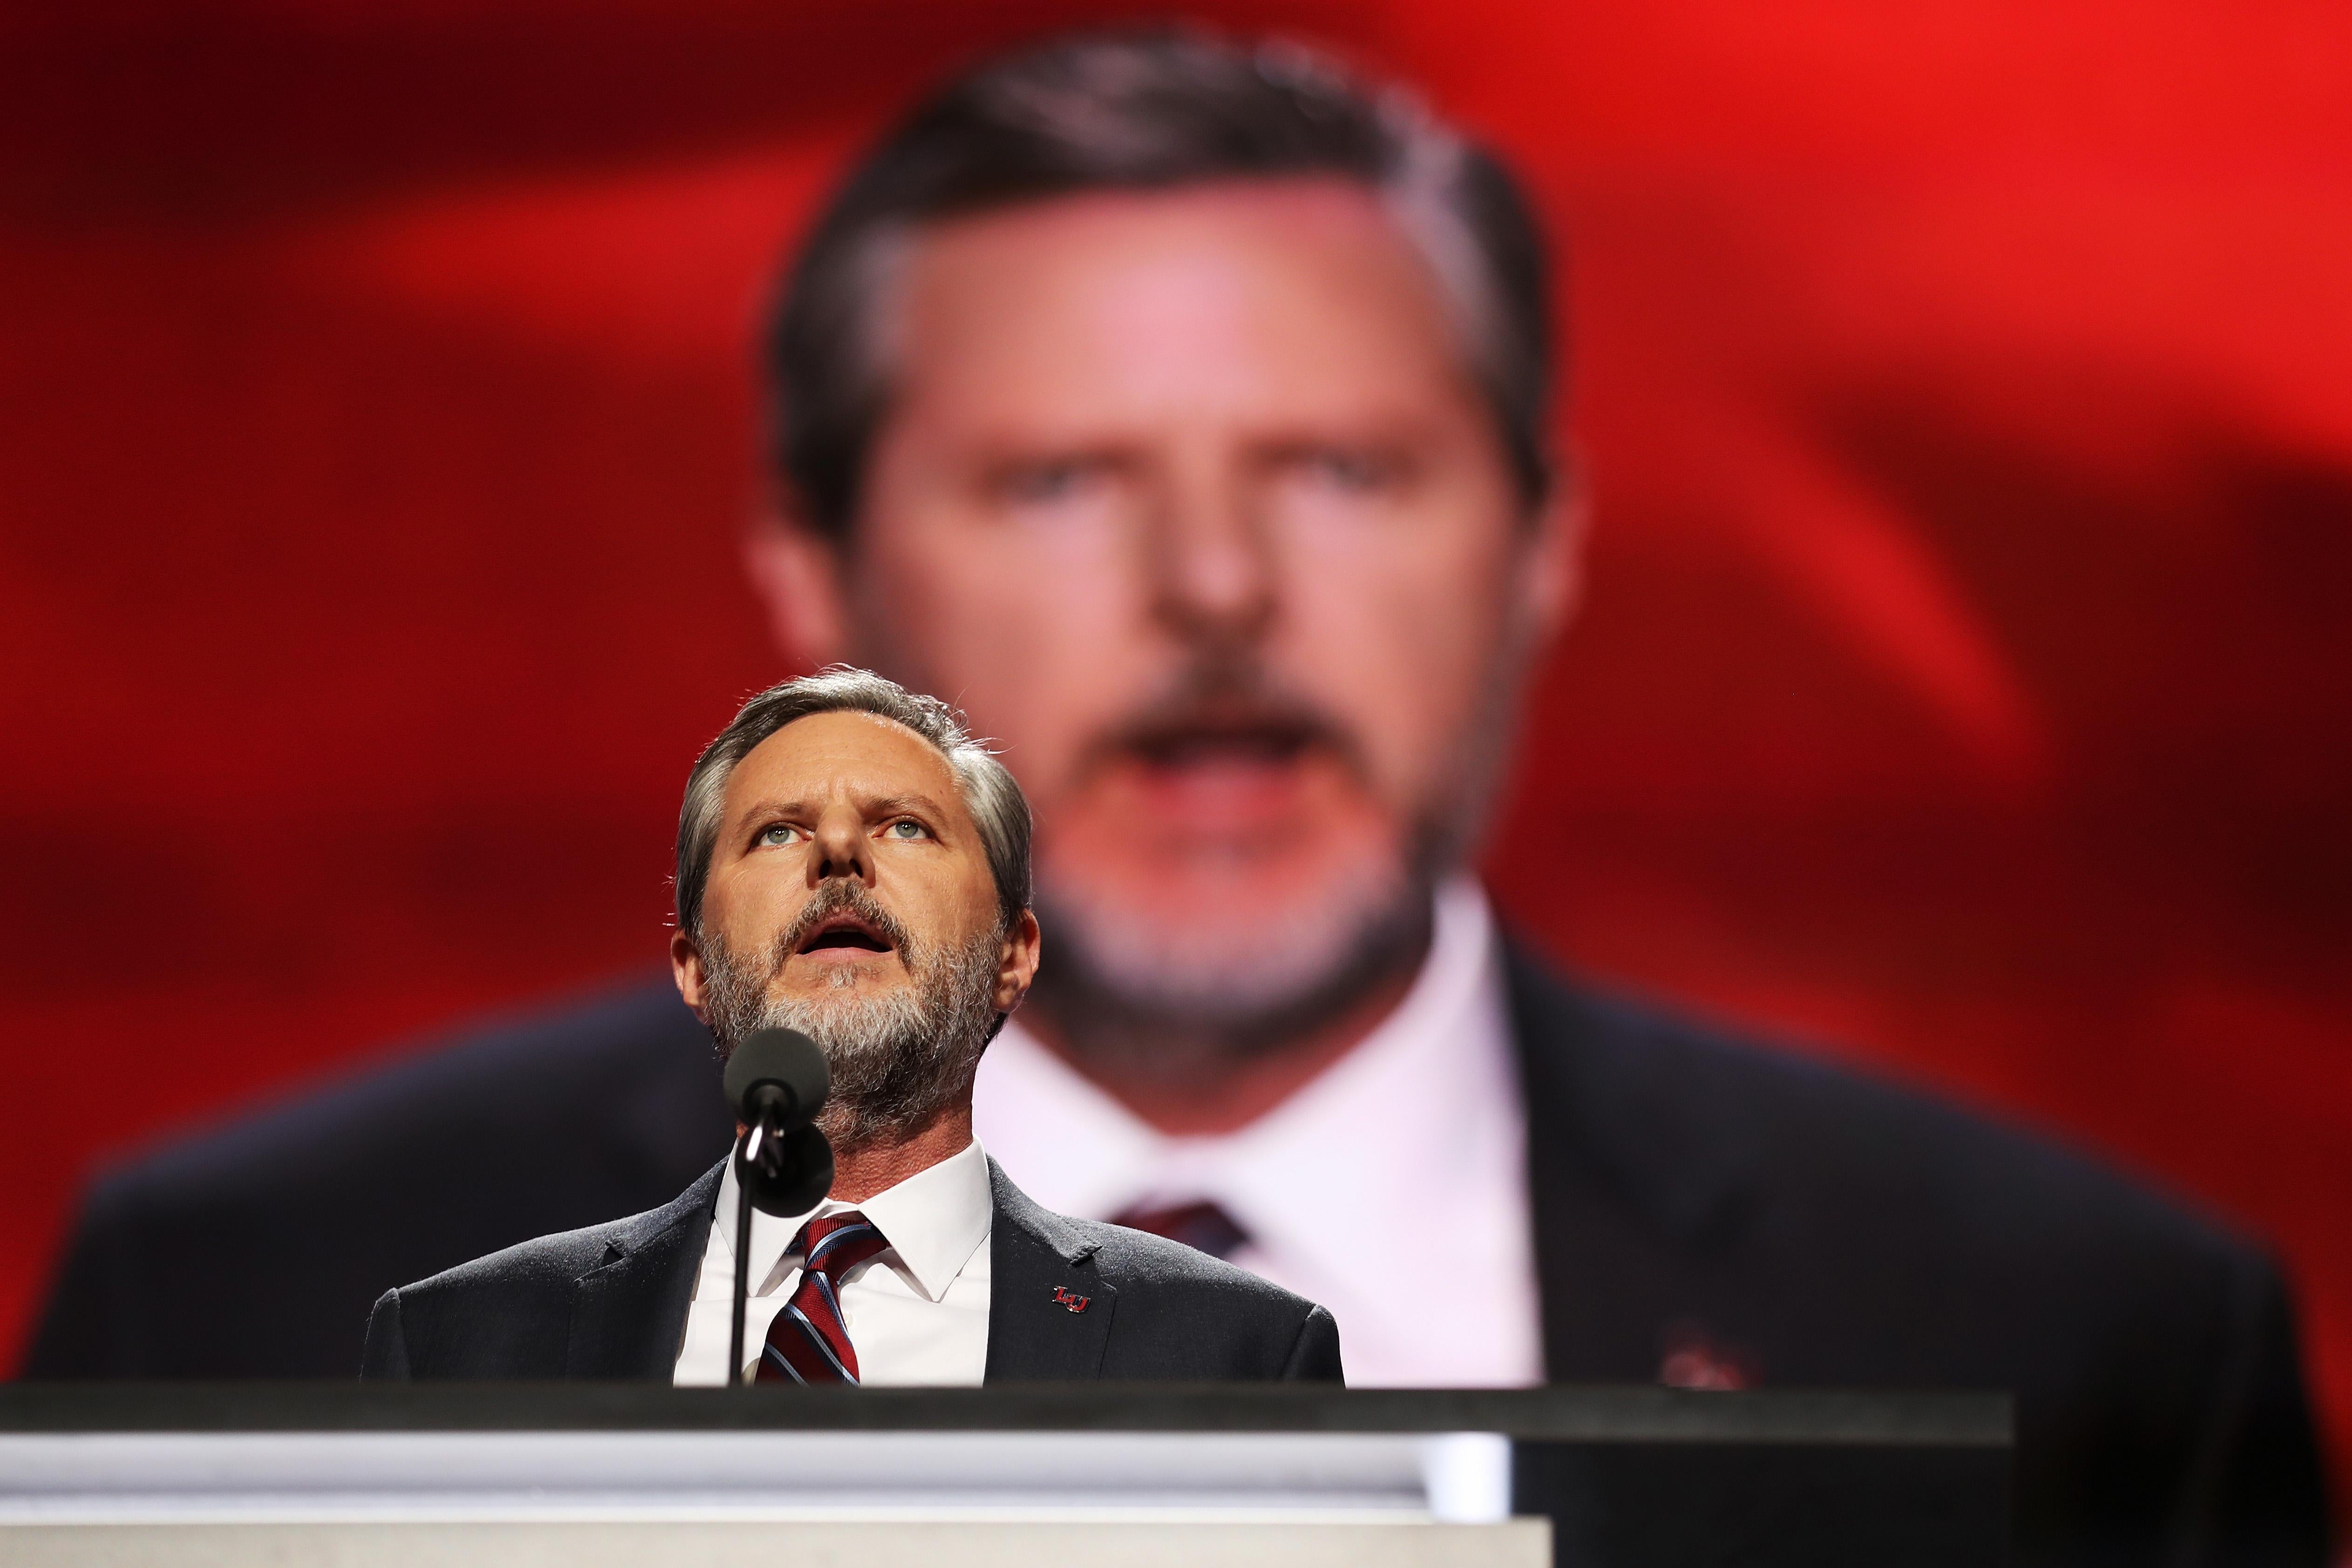 CLEVELAND, OH - JULY 21:  President of Liberty University, Jerry Falwell Jr., delivers a speech during the evening session on the fourth day of the Republican National Convention on July 21, 2016 at the Quicken Loans Arena in Cleveland, Ohio. Republican presidential candidate Donald Trump received the number of votes needed to secure the party's nomination. An estimated 50,000 people are expected in Cleveland, including hundreds of protesters and members of the media. The four-day Republican National Convention kicked off on July 18.  (Photo by John Moore/Getty Images)